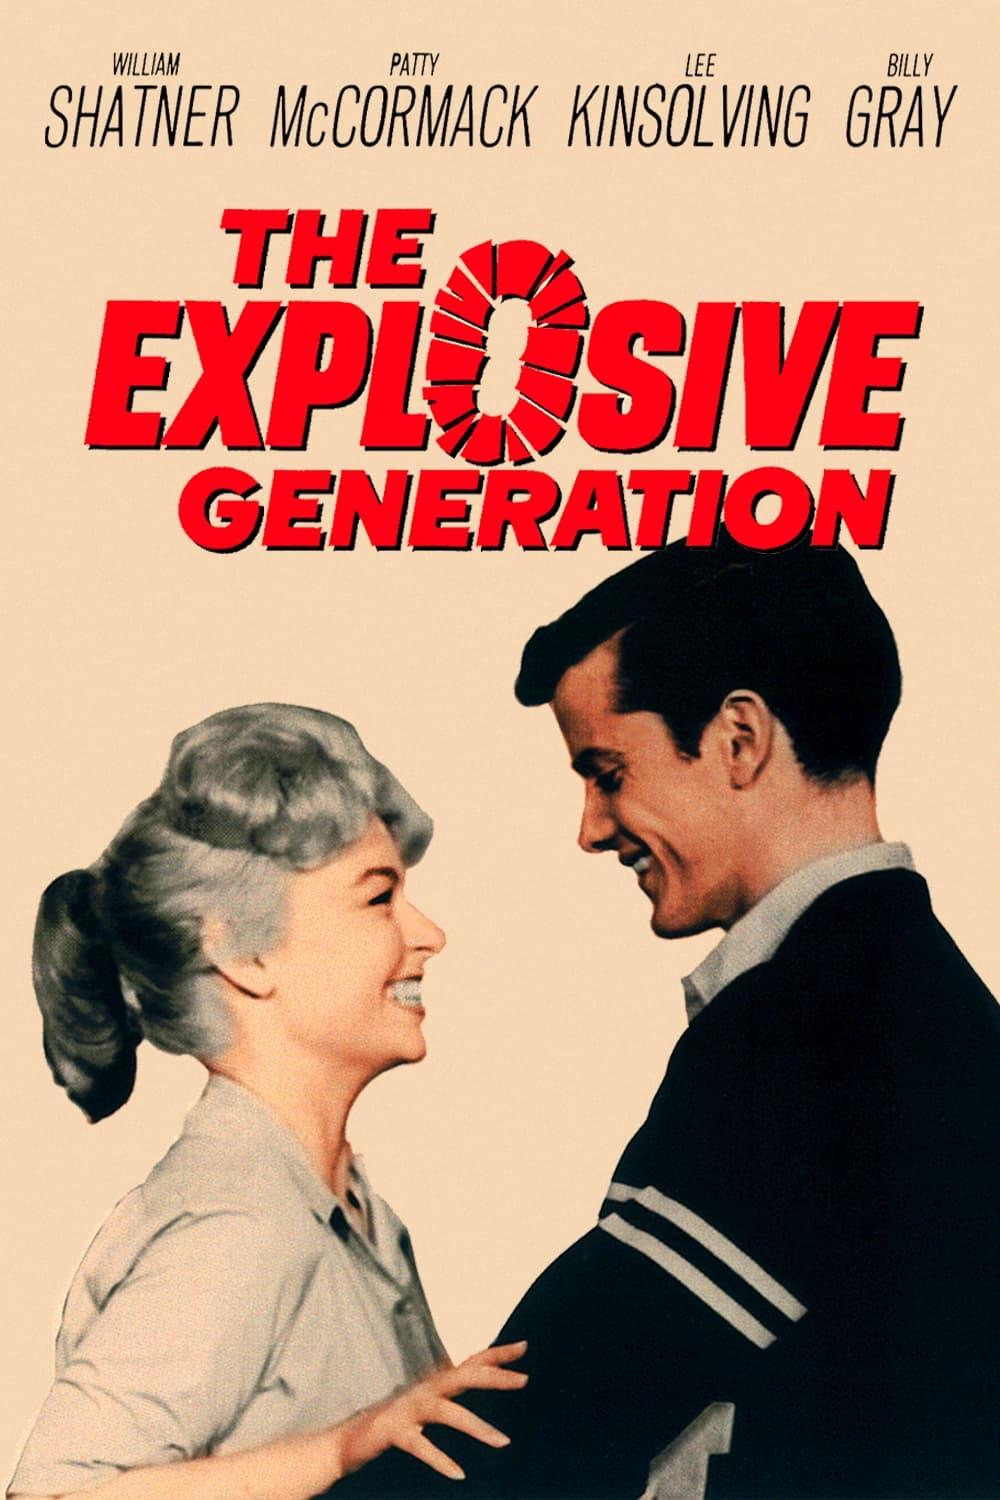 The Explosive Generation poster